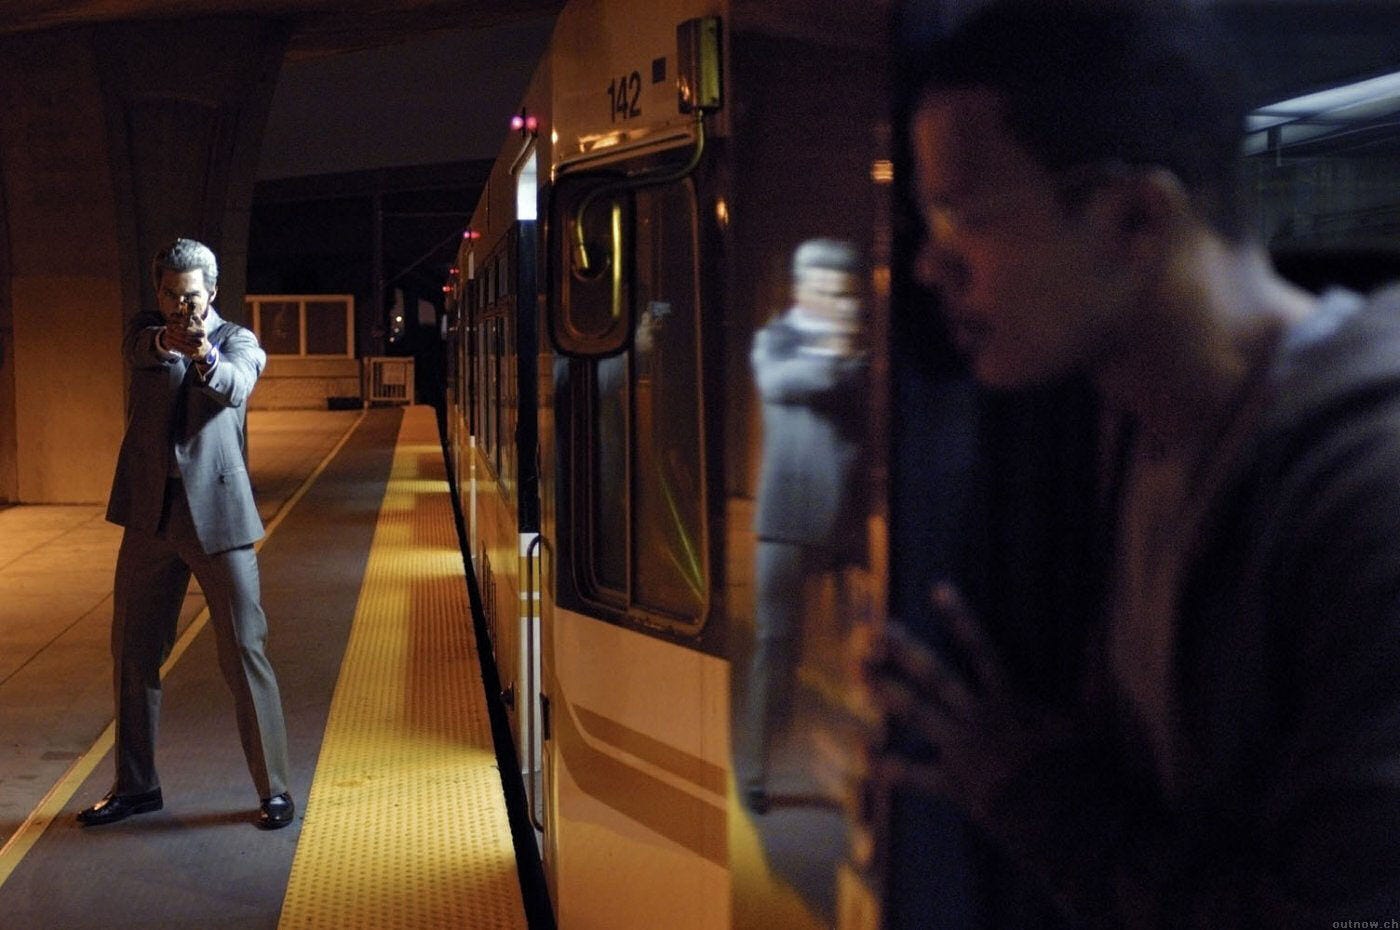 Student Film Reviews » Blog Archive » Collateral (Michael Mann, 2004): USA